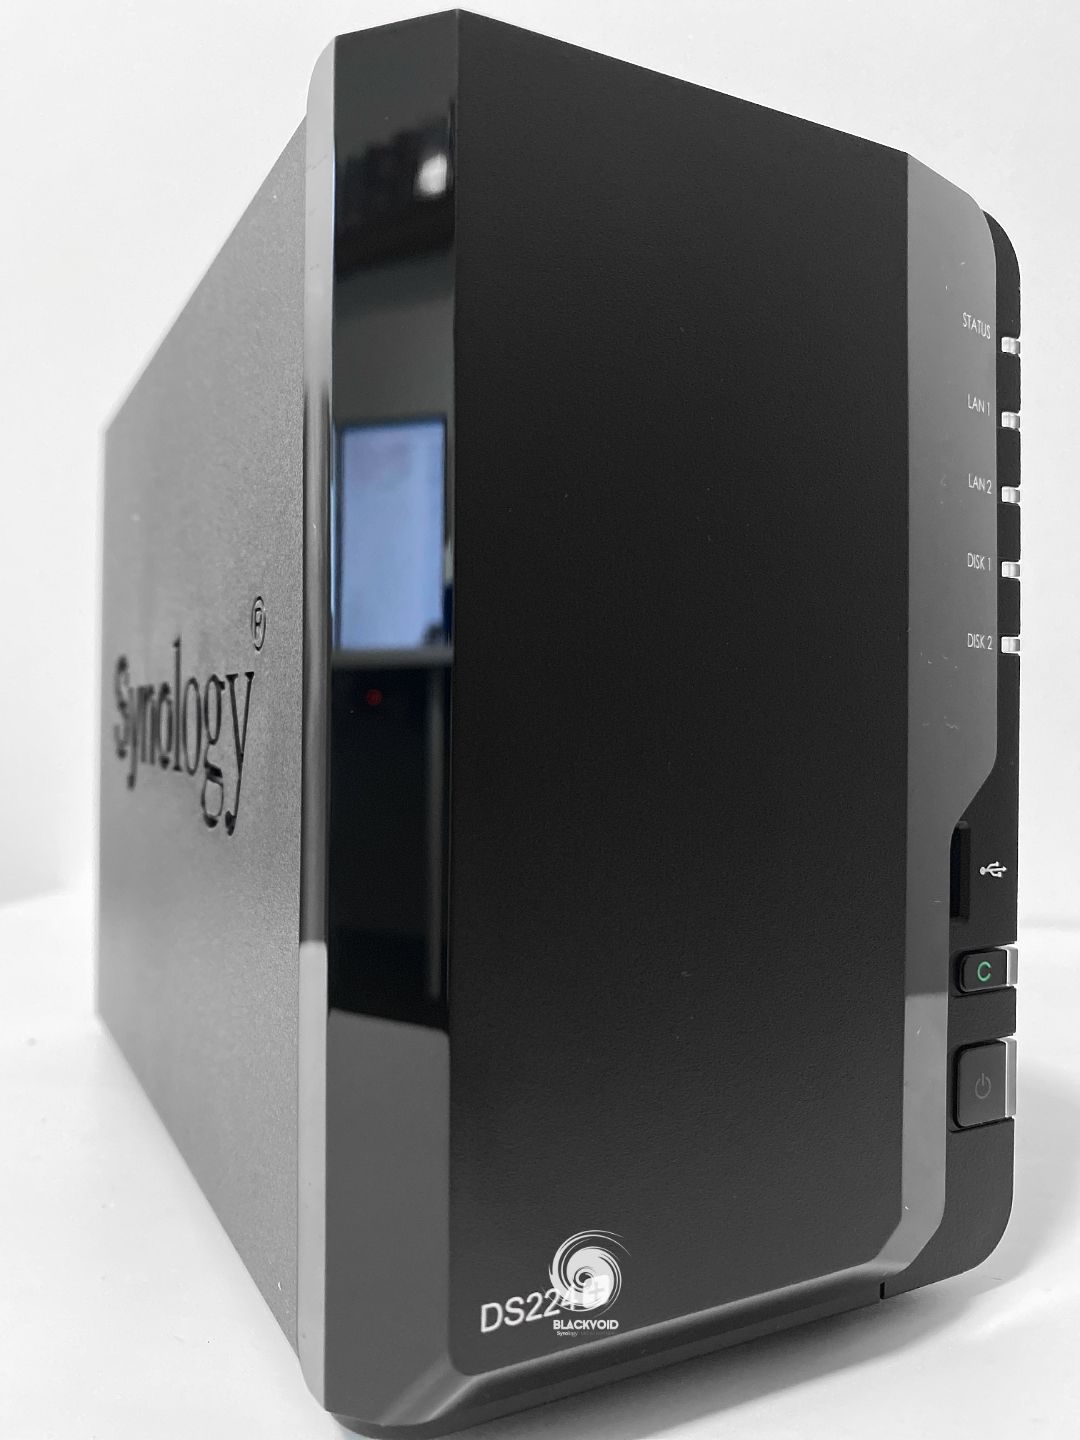 Synology DS224+ review